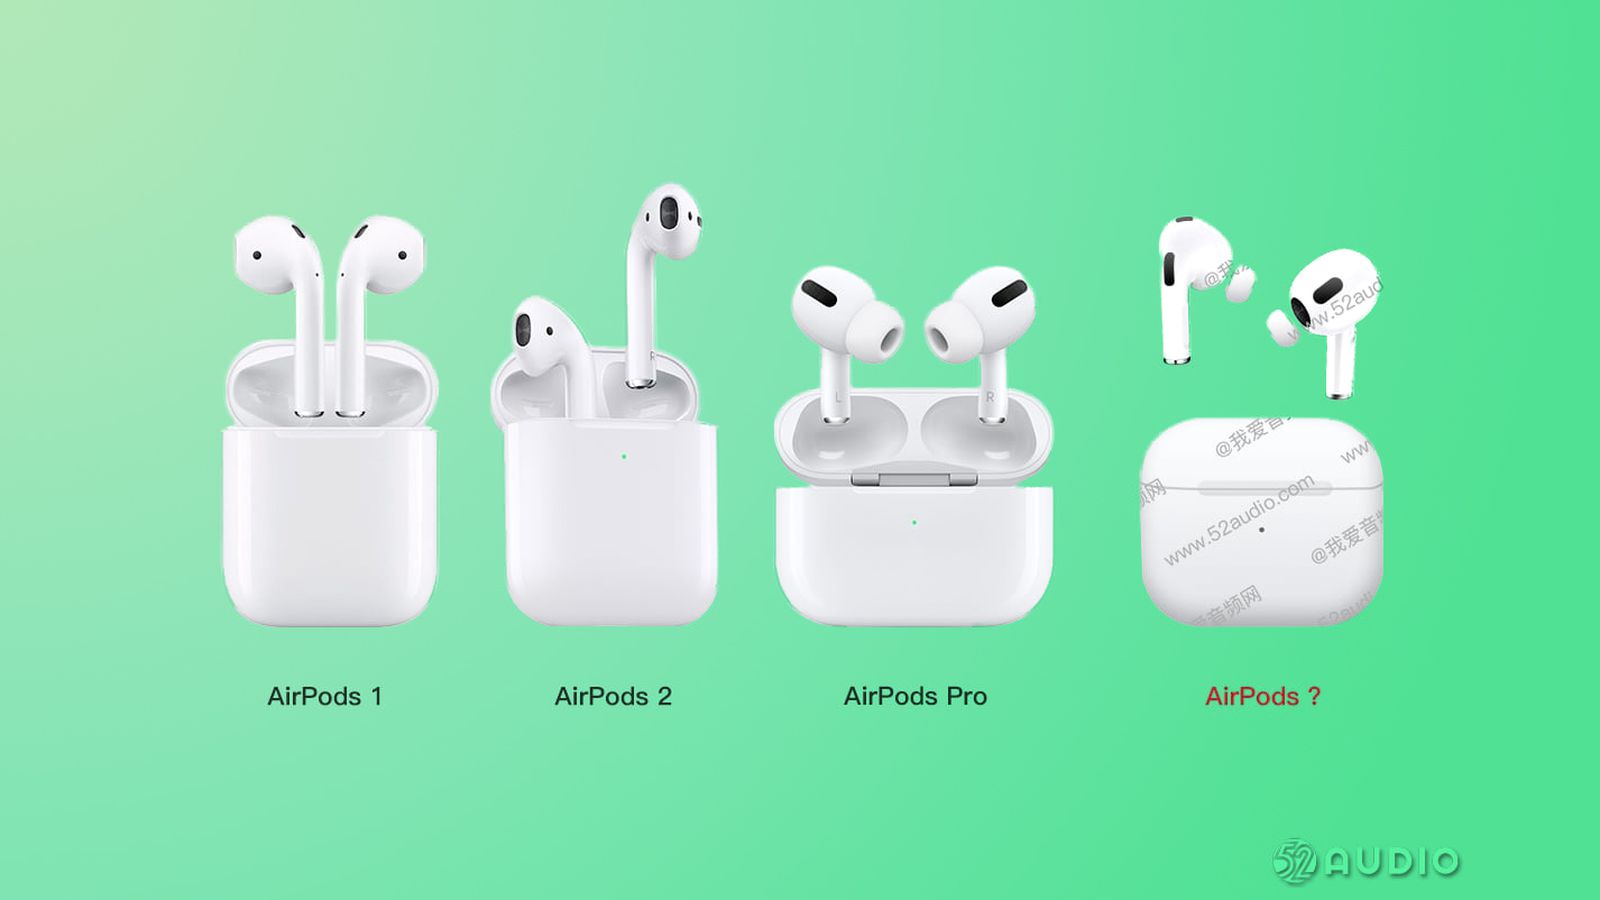 New AirPods Expected Later This Year as Suppliers Begin Component Shipments - MacRumors